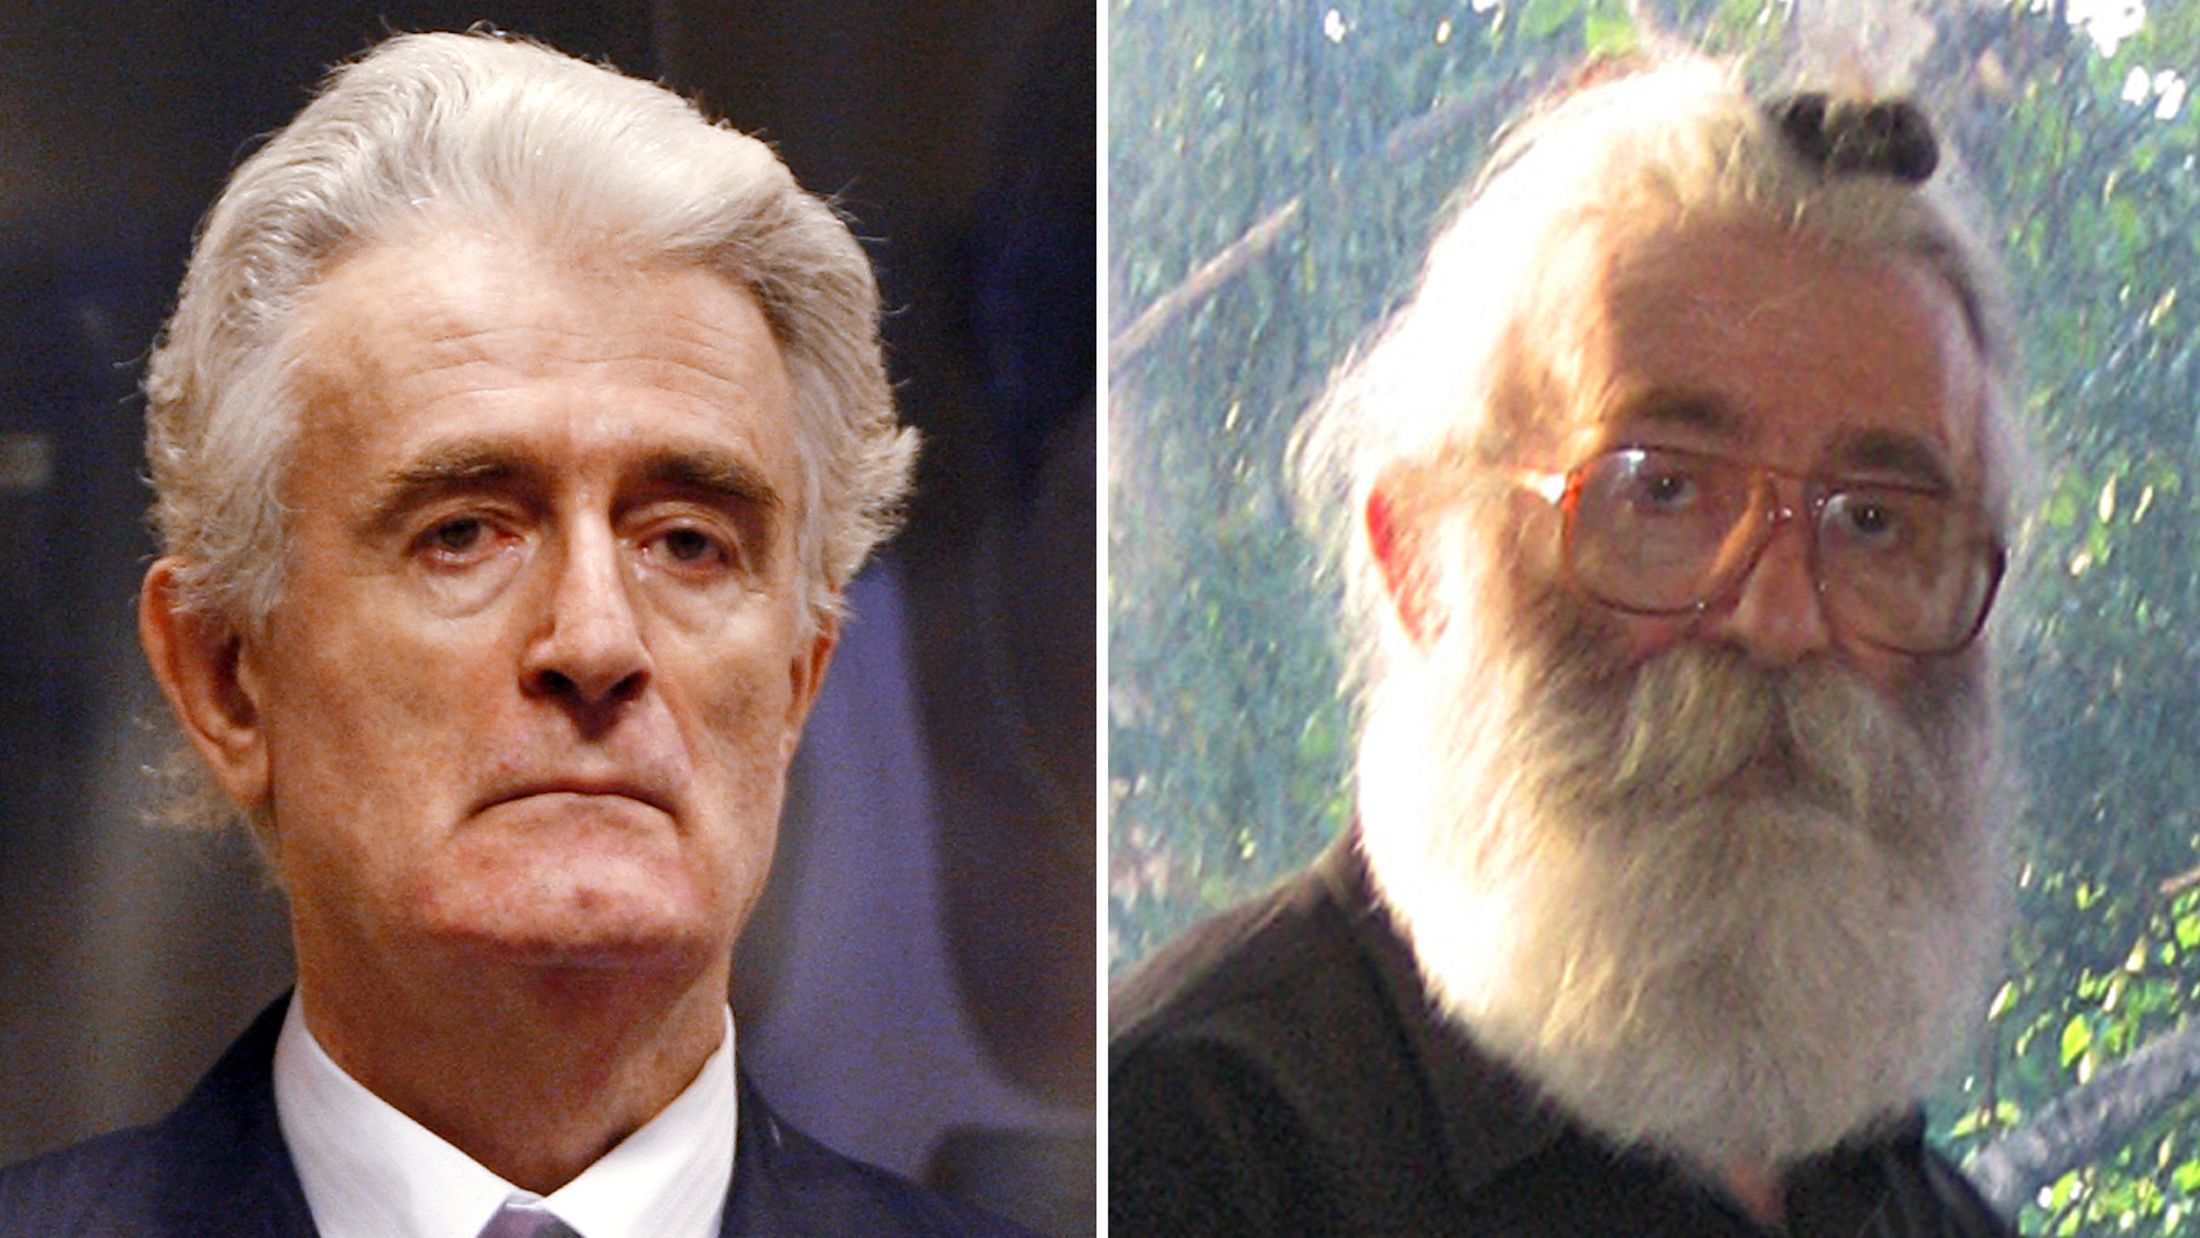 Karadzic pictured at the start of his trial in 2008, left, and in his disguise, right